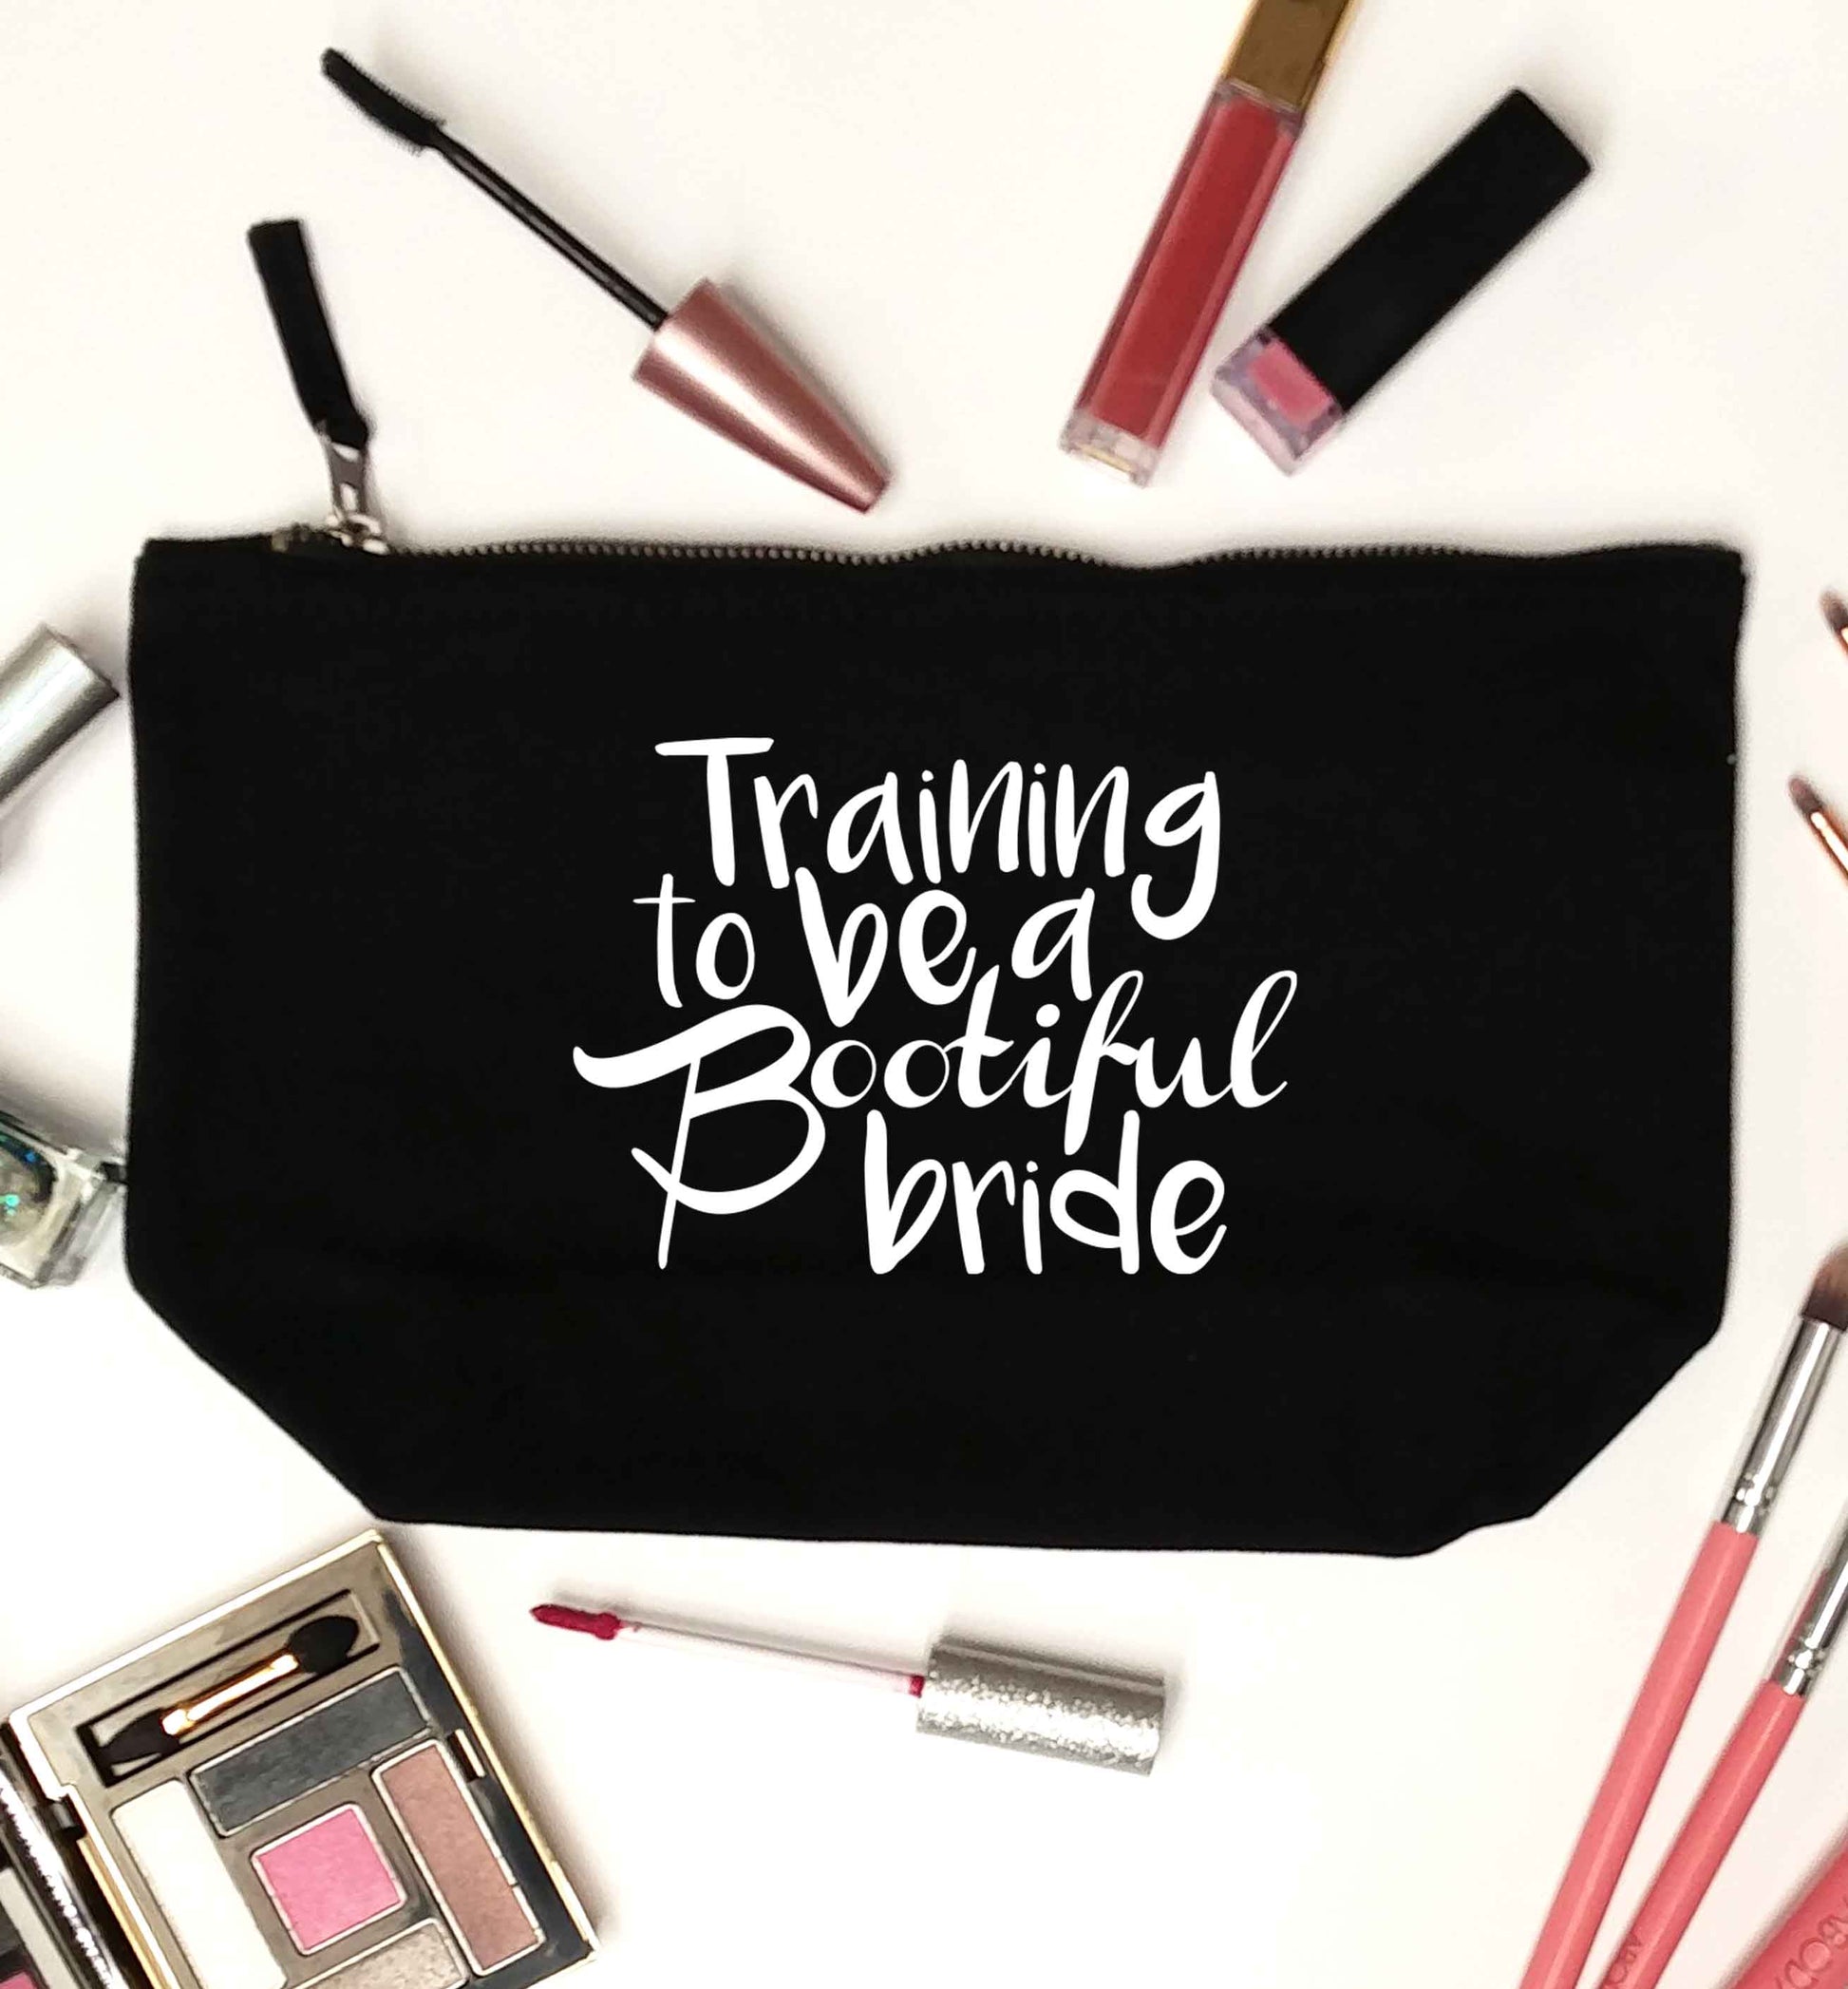 Get motivated and get fit for your big day! Our workout quotes and designs will get you ready to sweat! Perfect for any bride, groom or bridesmaid to be!  black makeup bag